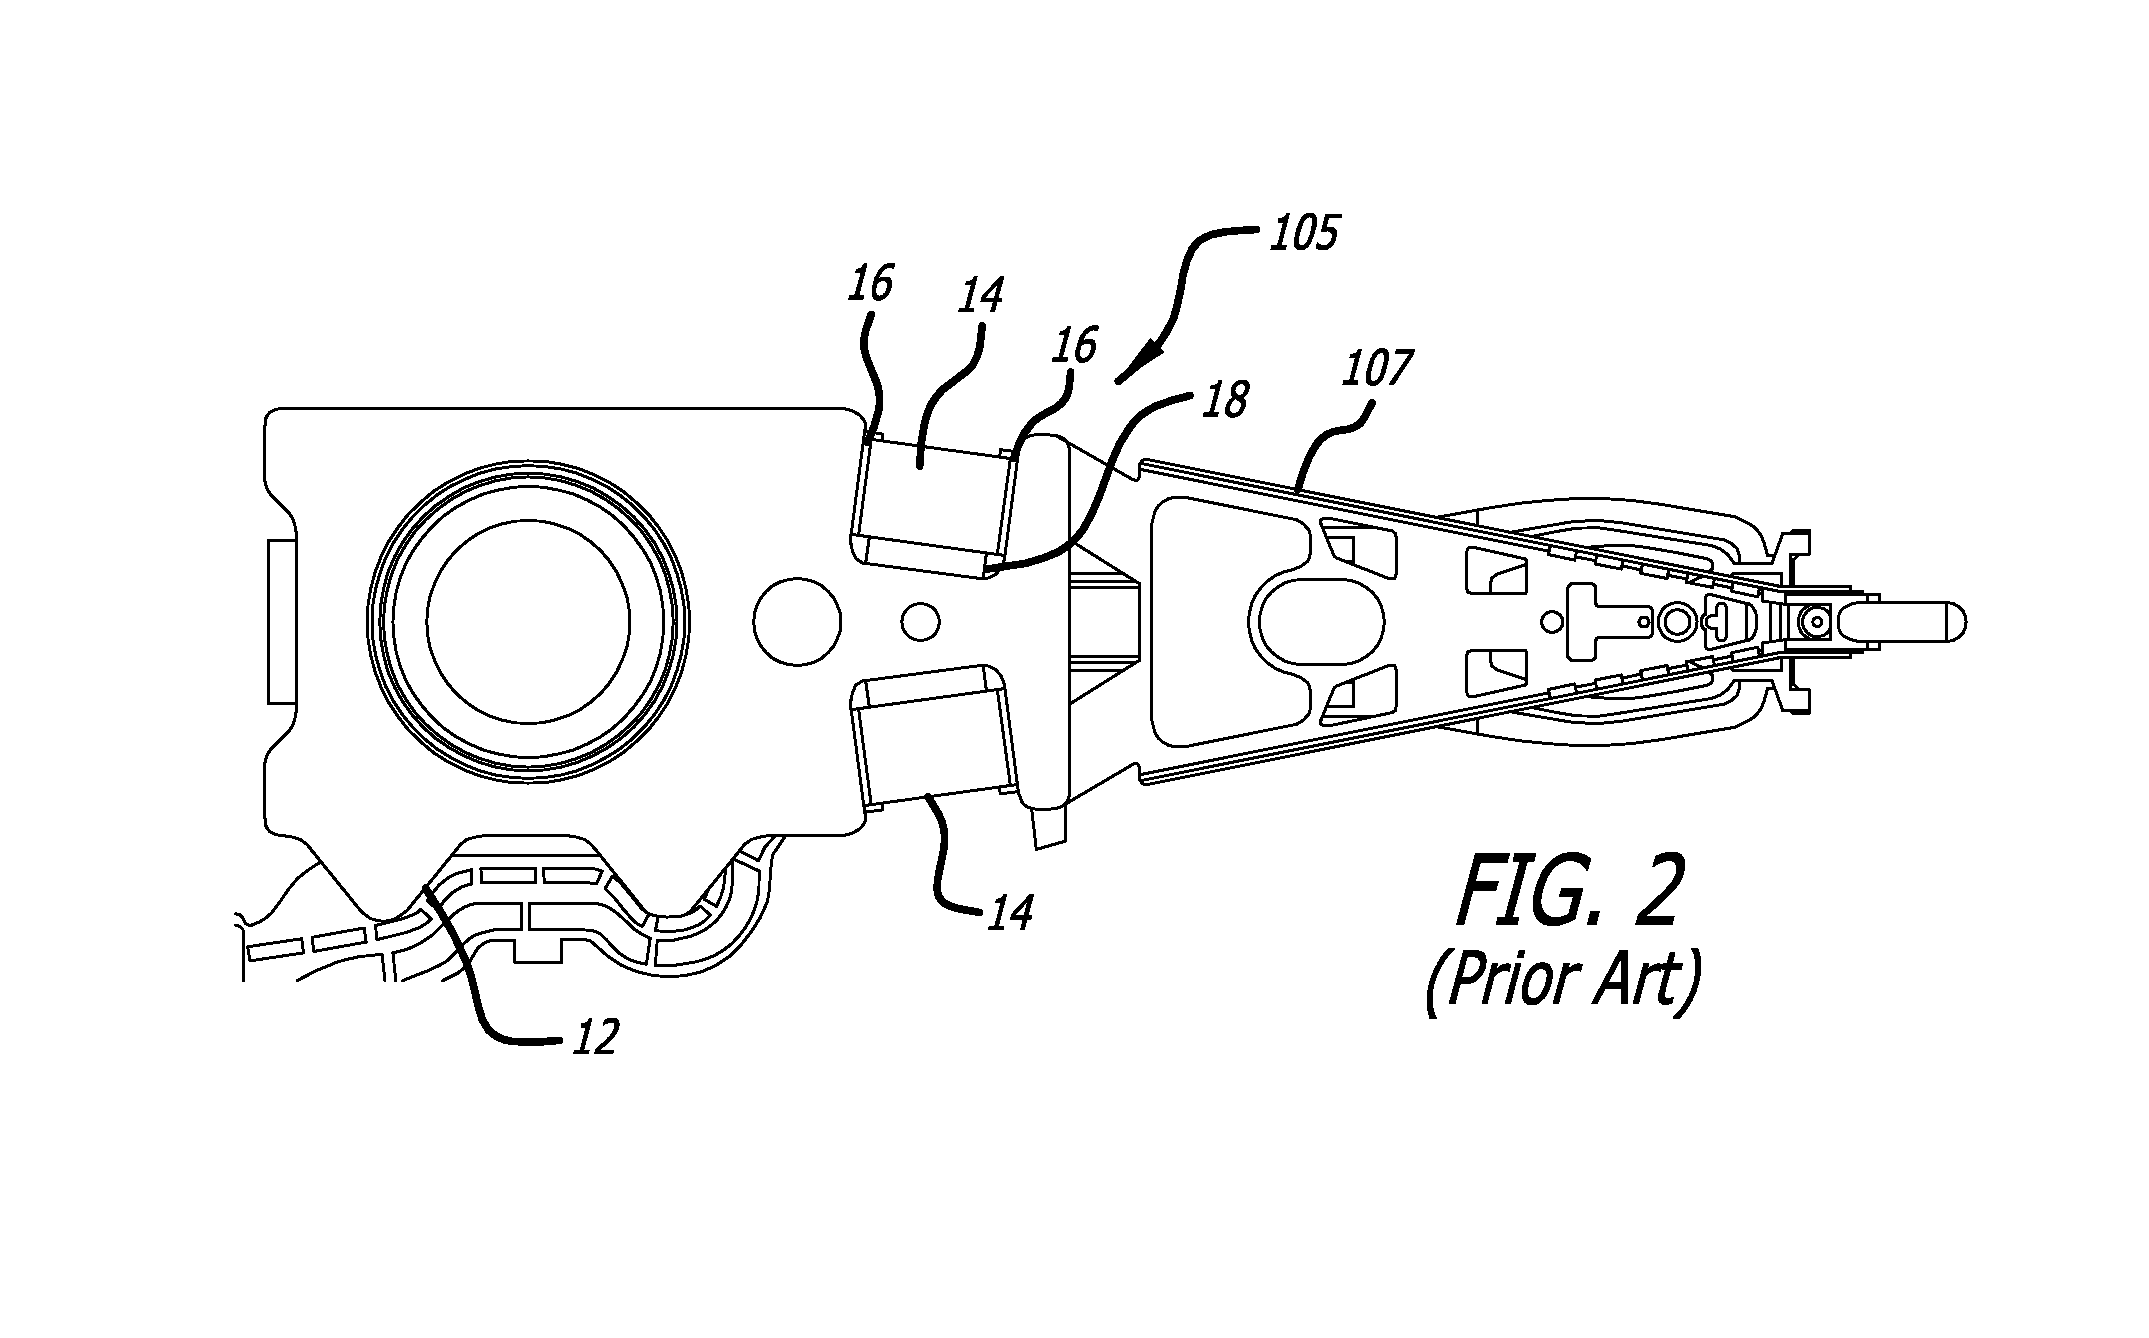 Assembly of DSA suspensions using microactuators with partially cured adhesive, and DSA suspensions having PZTs with wrap-around electrodes